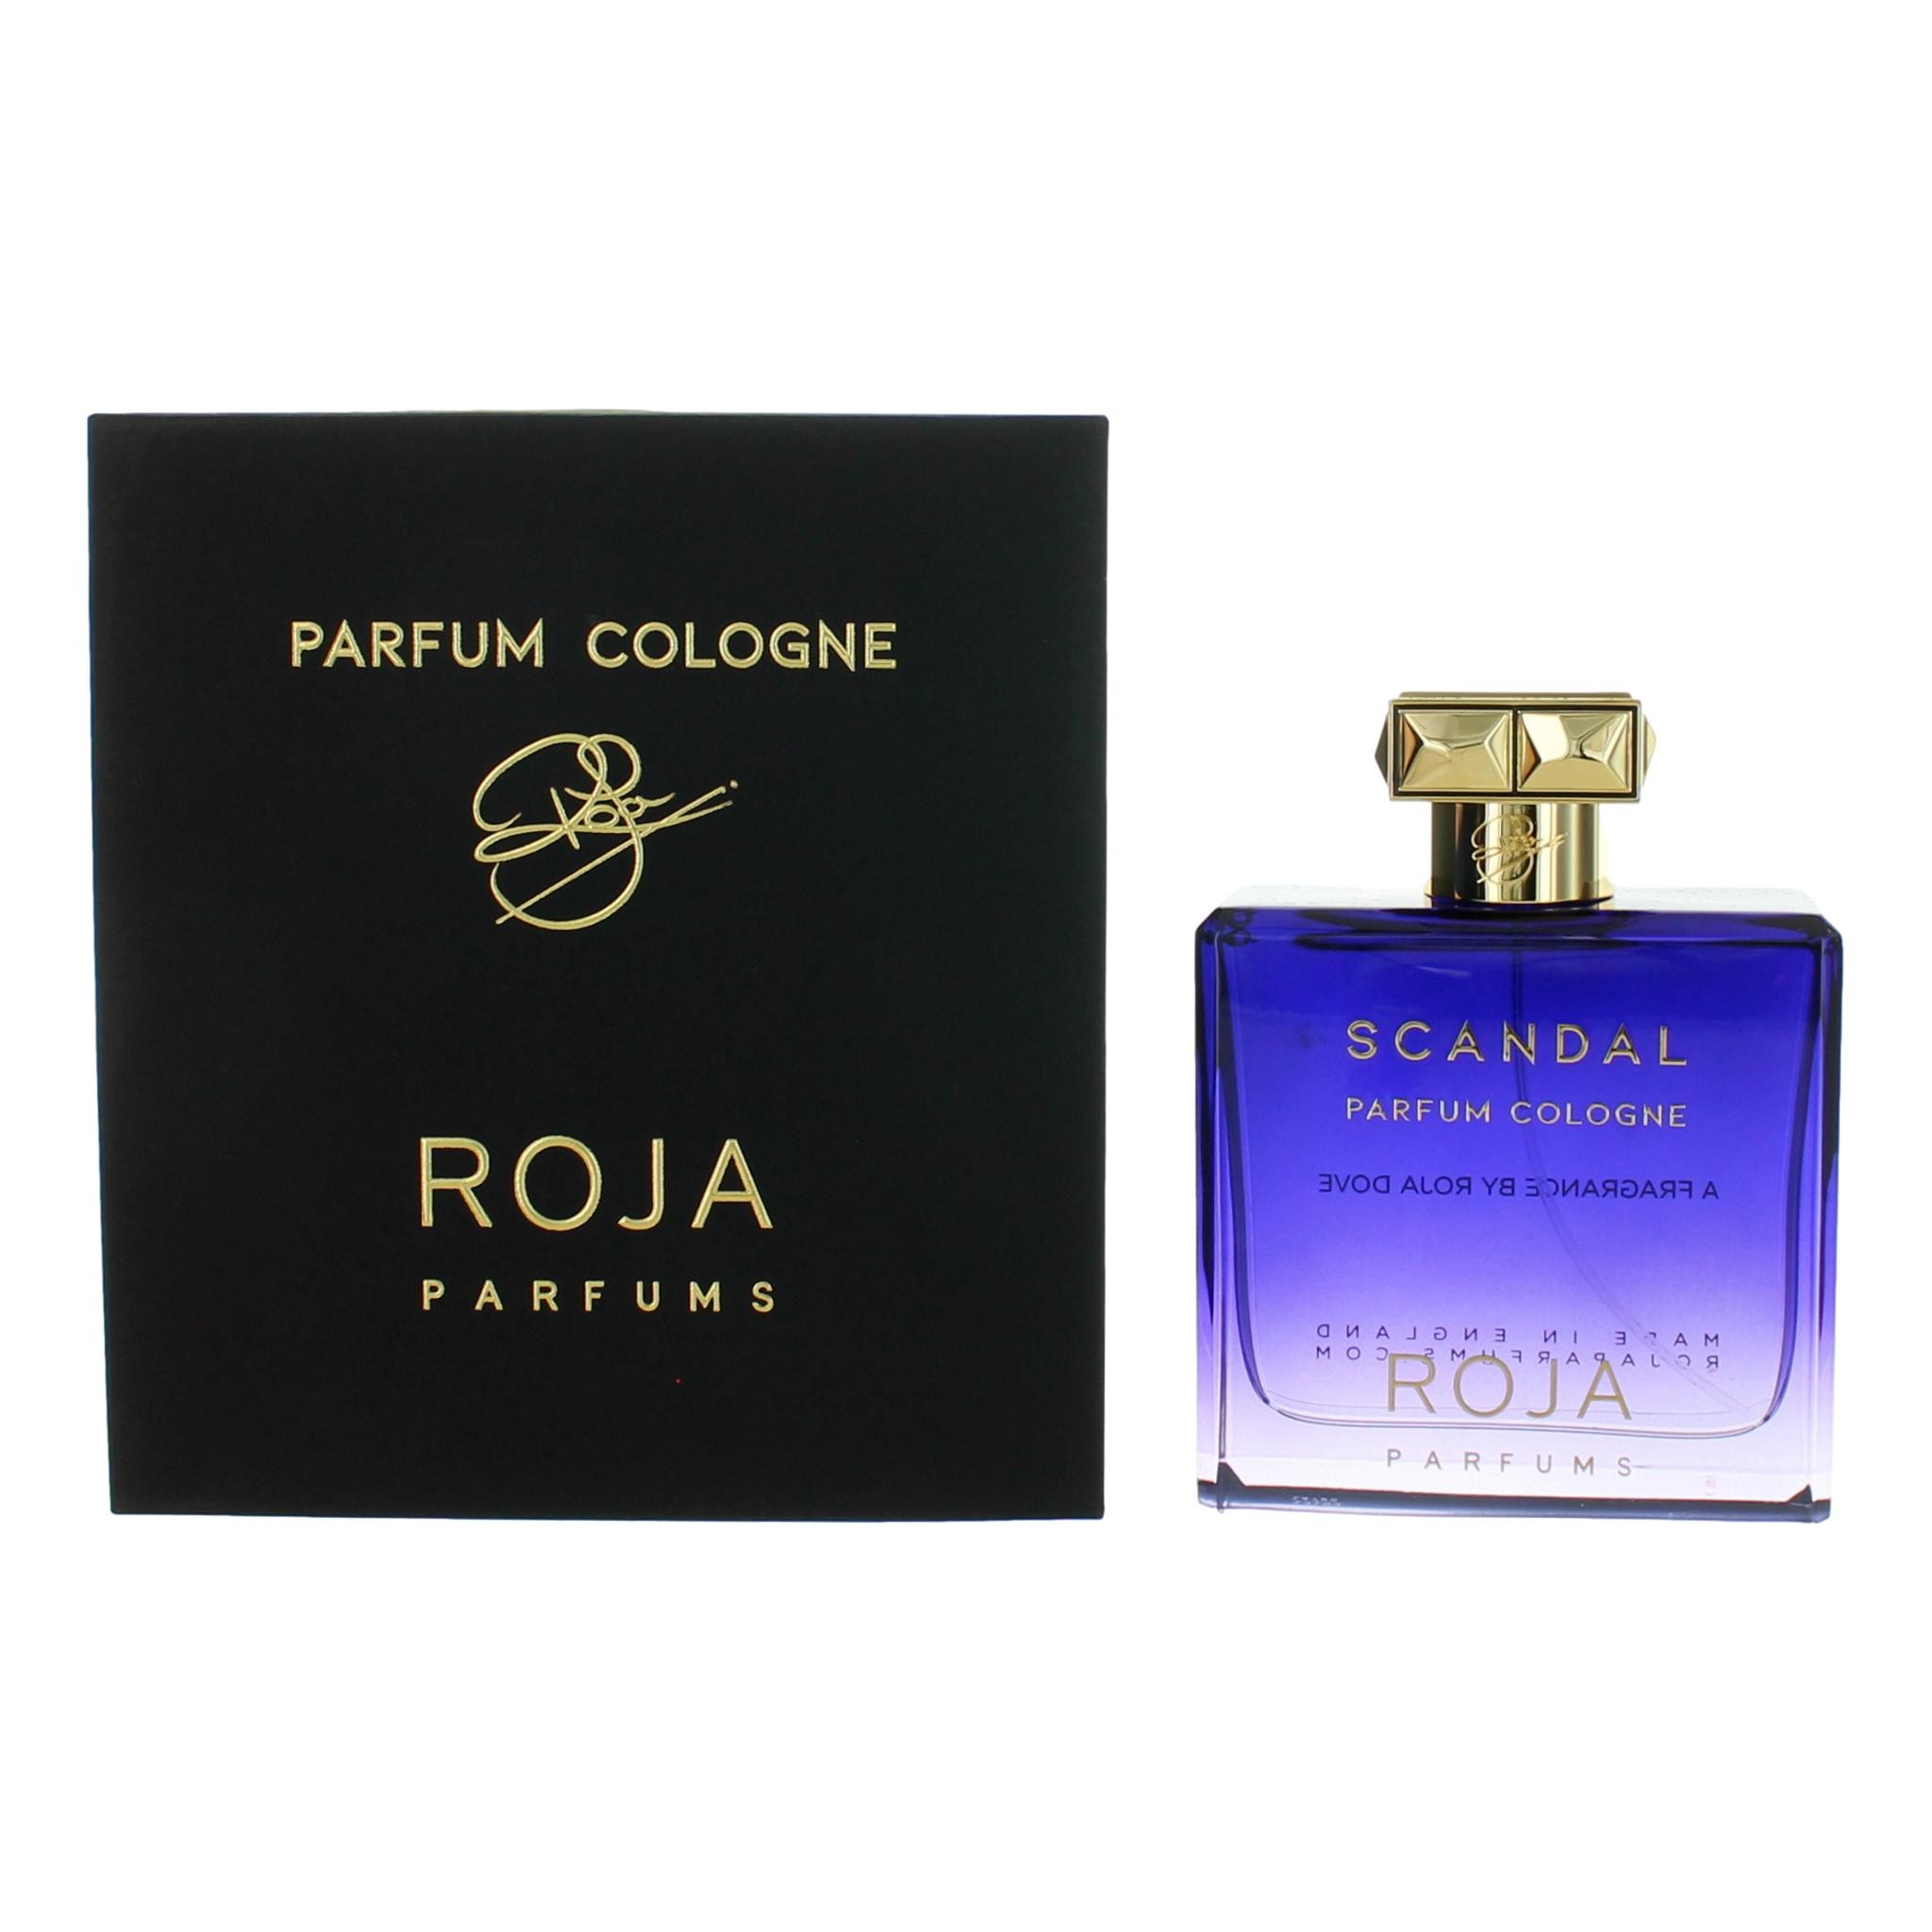 Scandal by Roja Parfums 3.4 oz Parfum Cologne Spray for Men